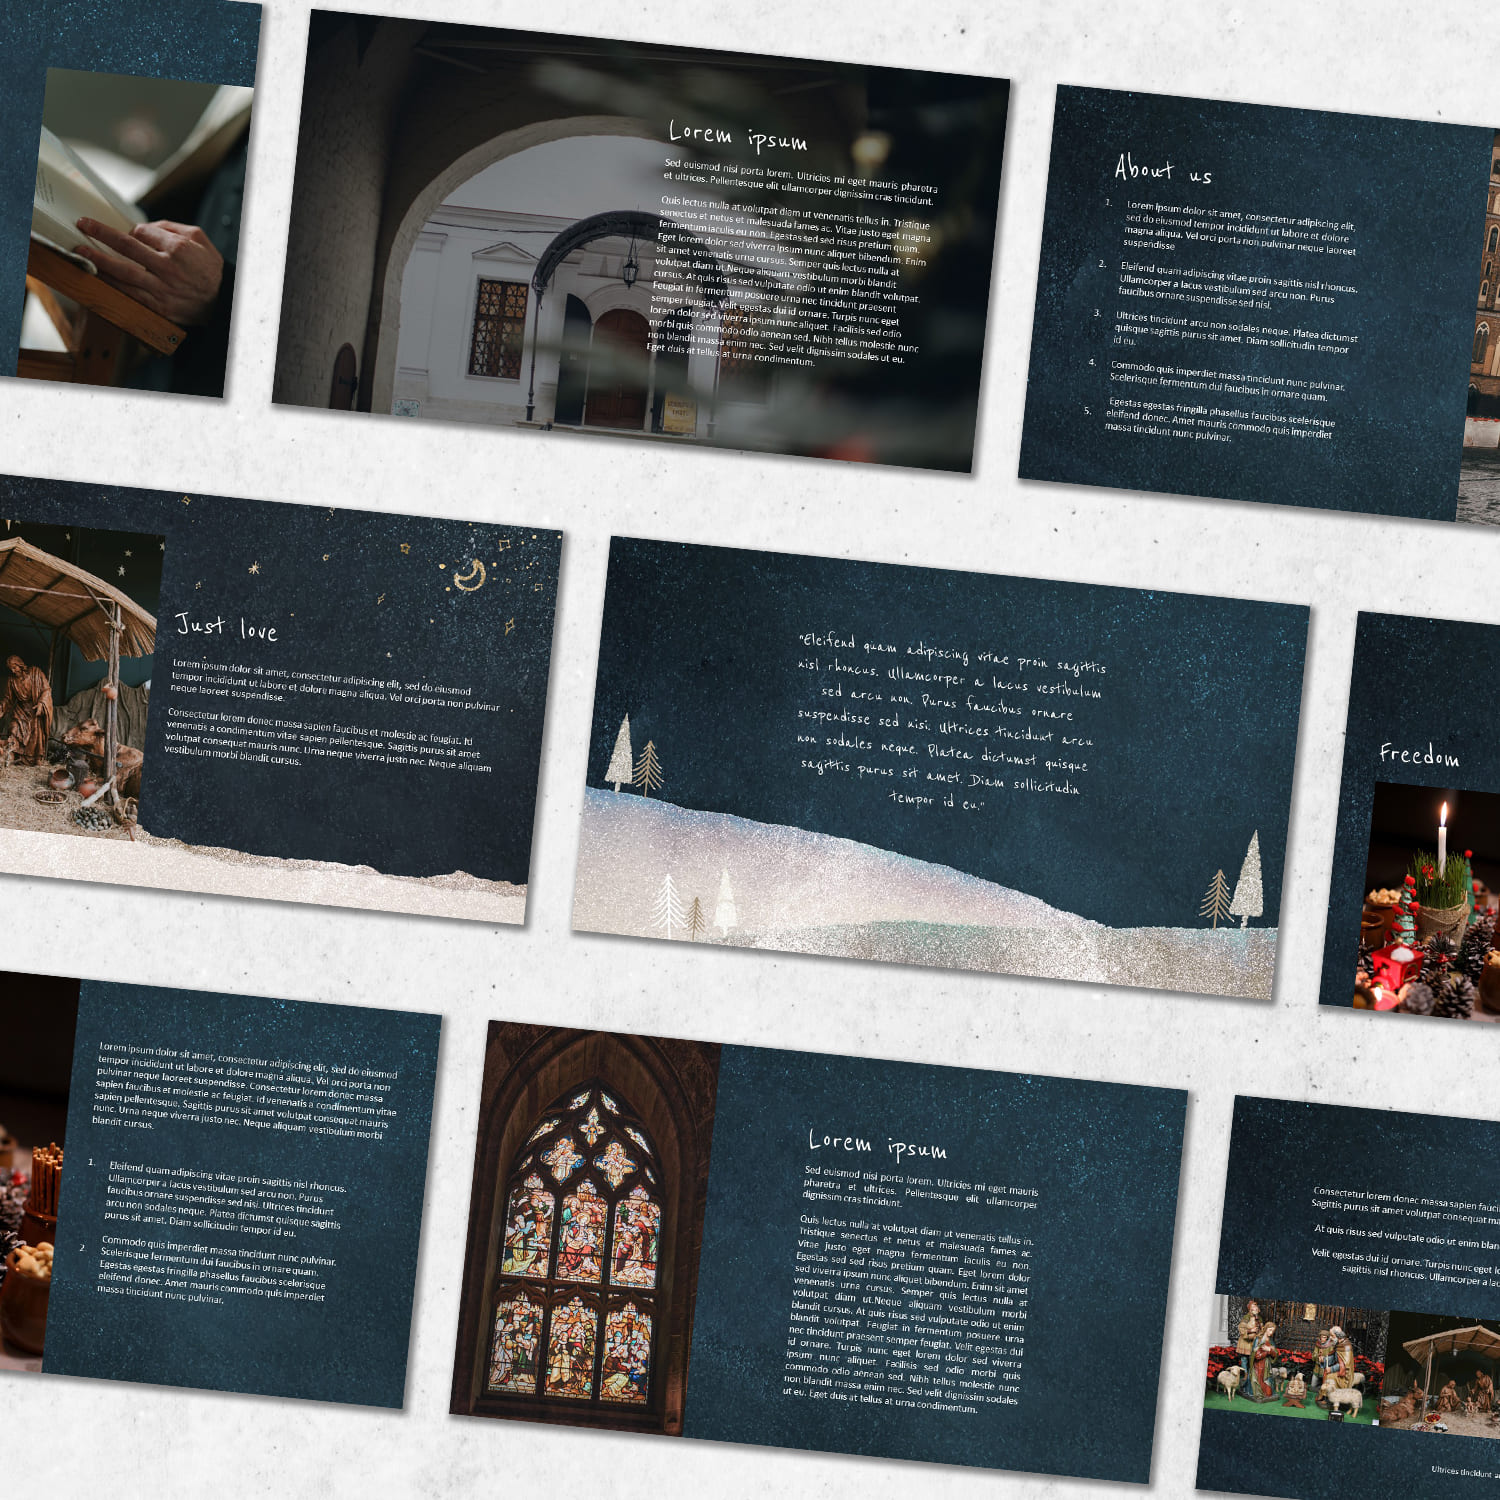 A selection of gorgeous images from a christian christmas powerpoint template.